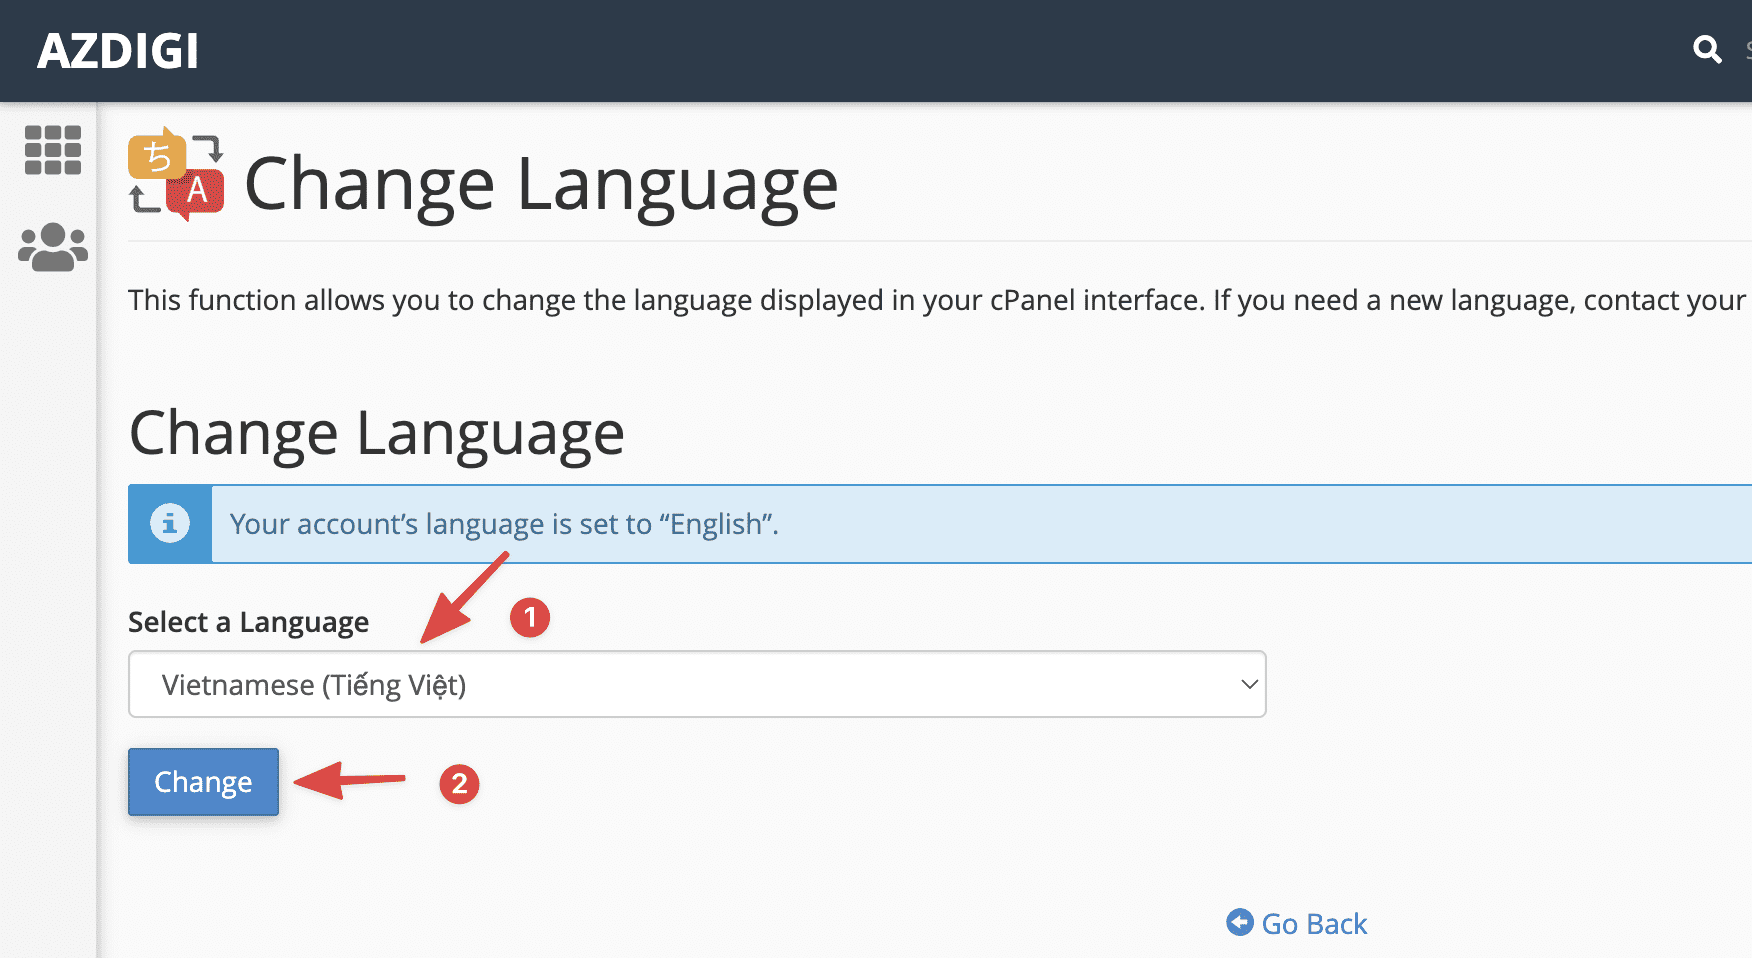 Change cPanel's Language and Style